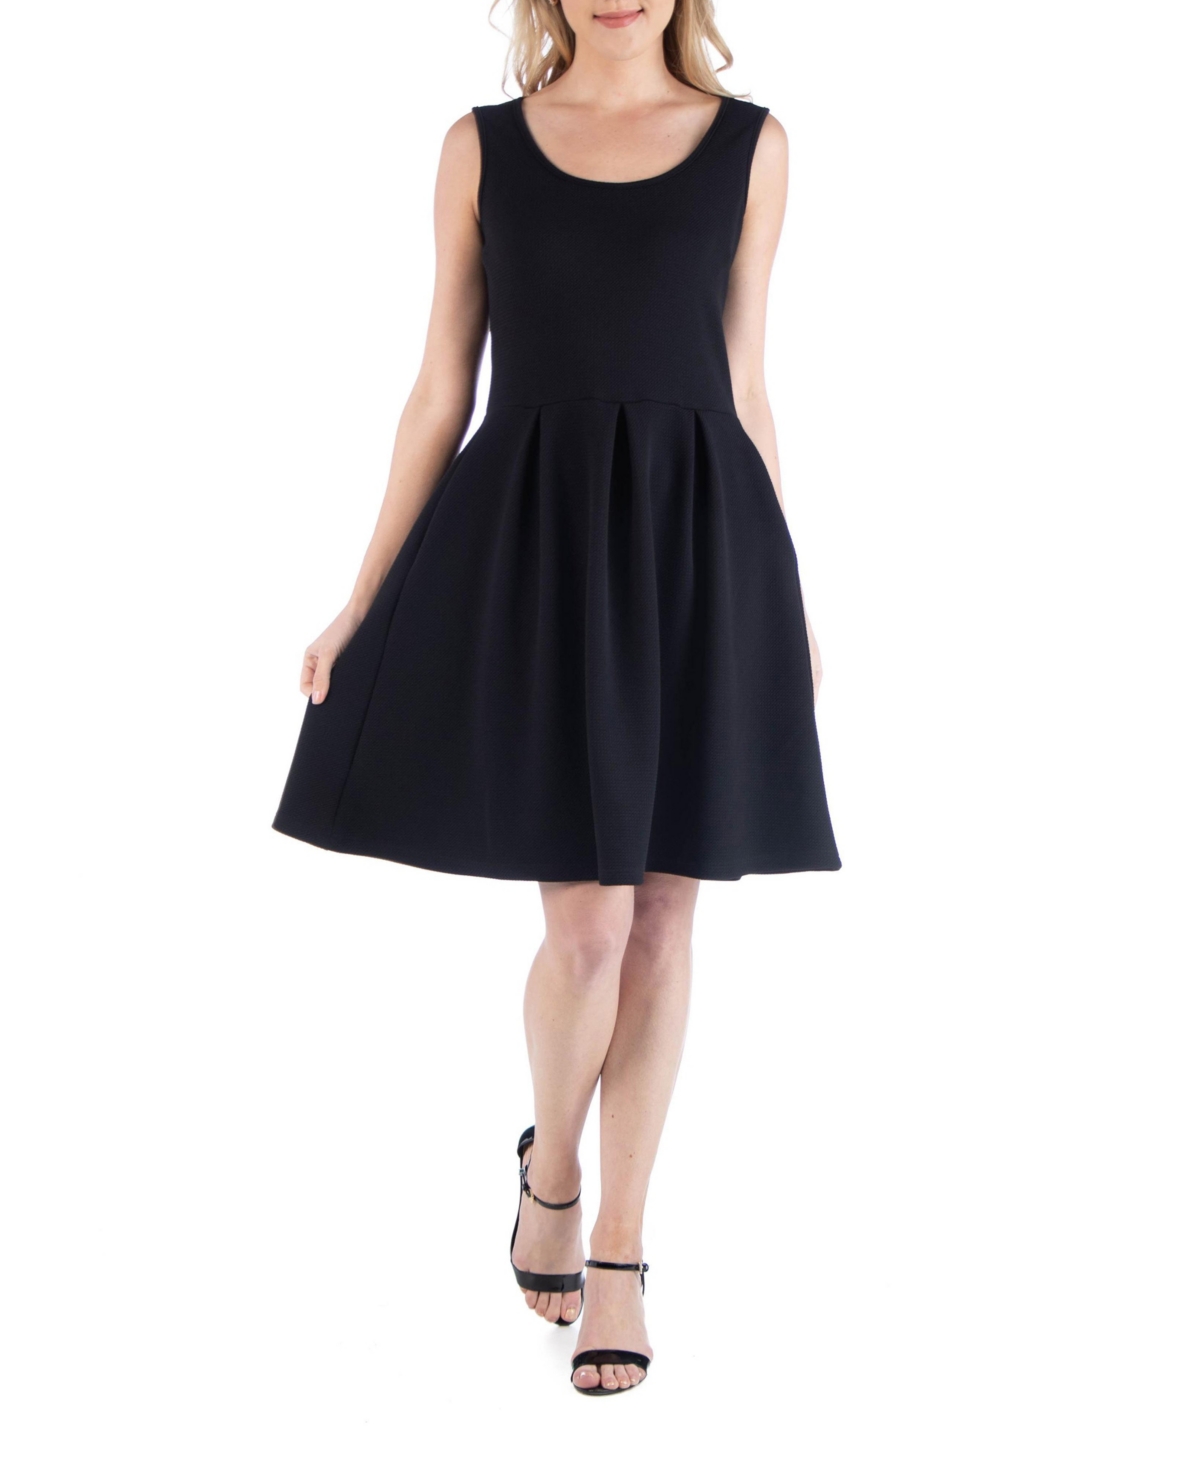 24seven Comfort Apparel Women's Sleeveless Pleated Skater Dress With Pockets In Black